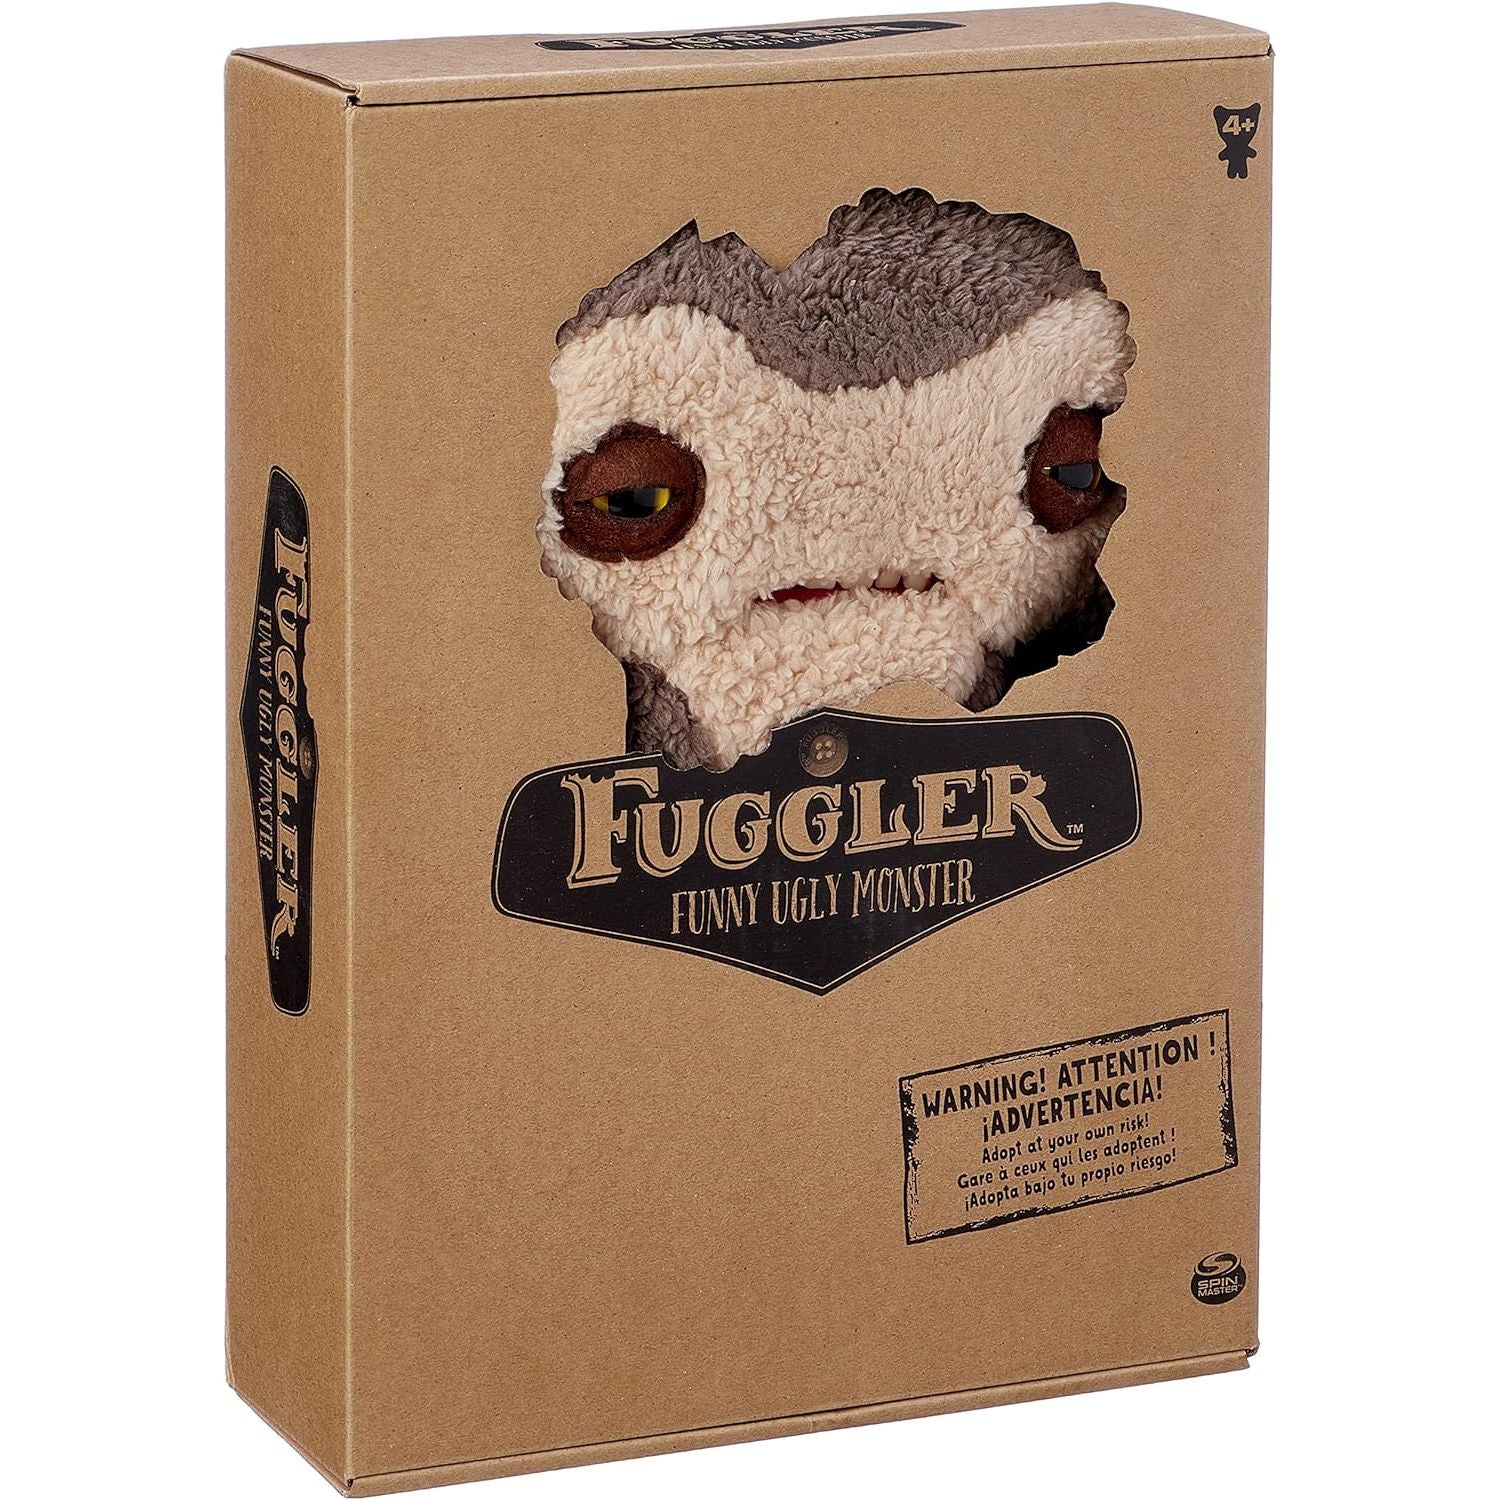 Fugglers Funny Ugly Monster Plush Toy Brown Large